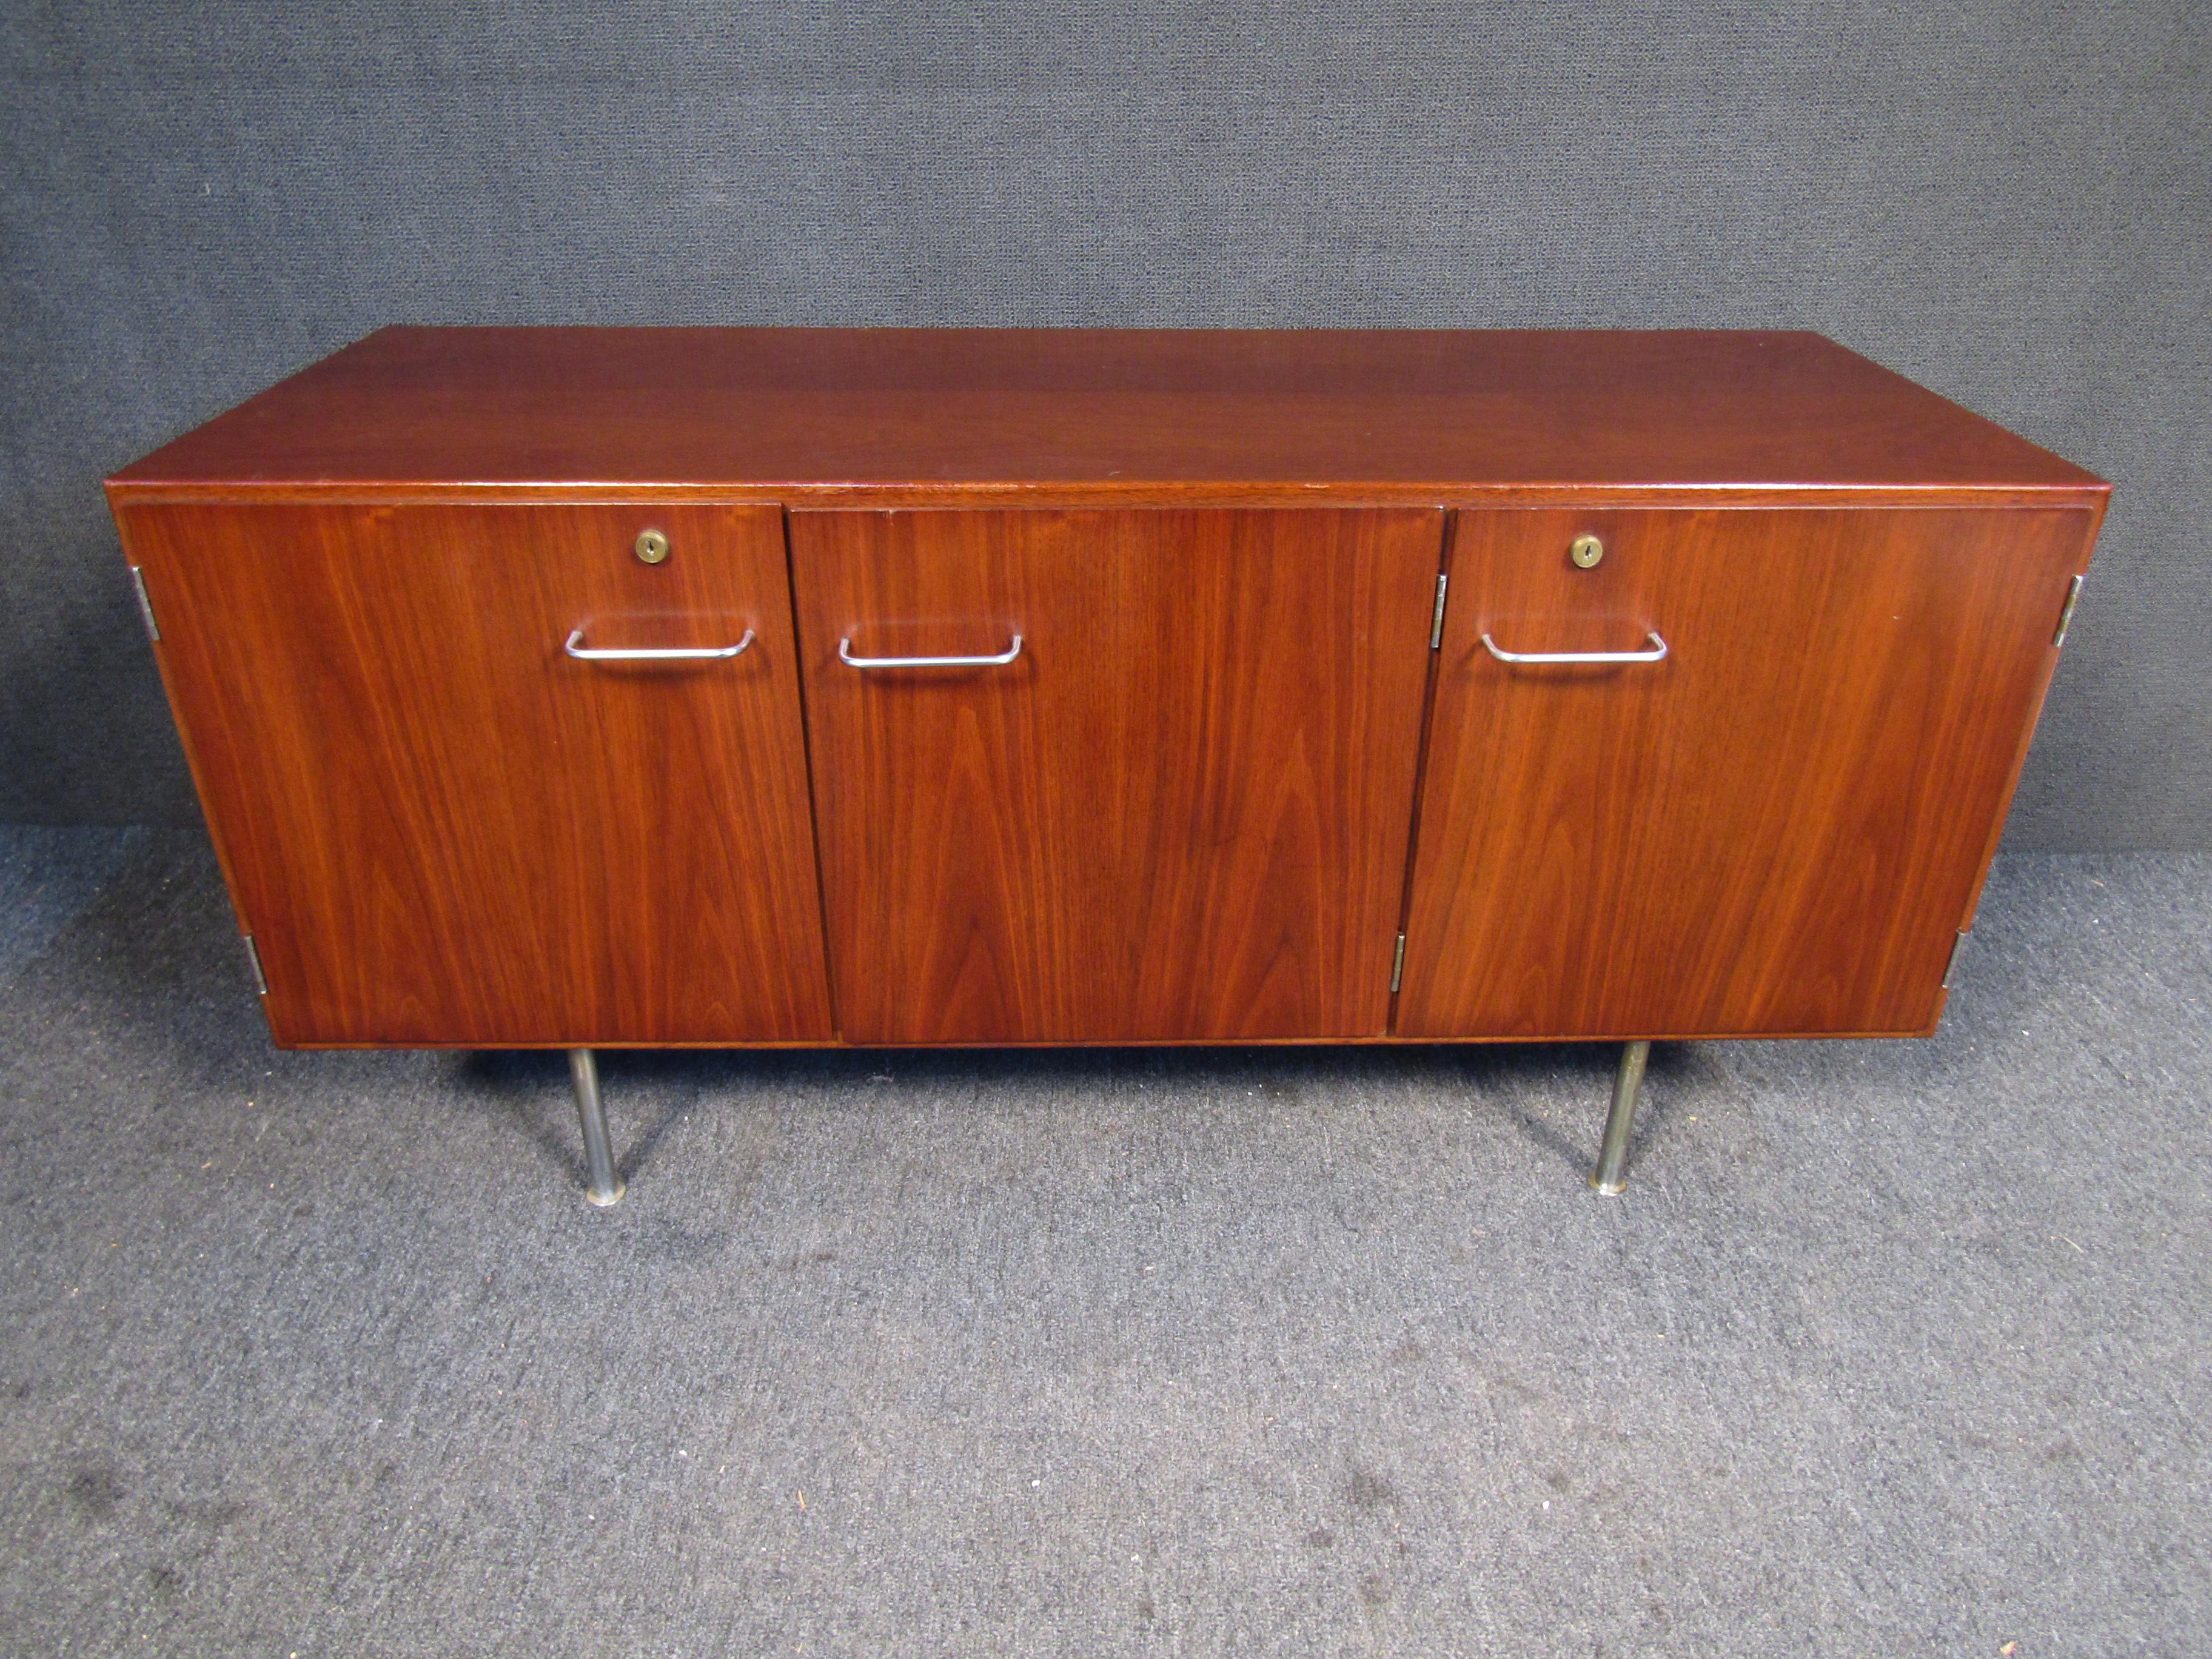 An elegant Mid-Century Modern sideboard with plenty of storage and style. Styled after the designs of Knoll Furniture, this vintage piece combines walnut wood with metal accents and legs. Please confirm item location with seller (NY/NJ).